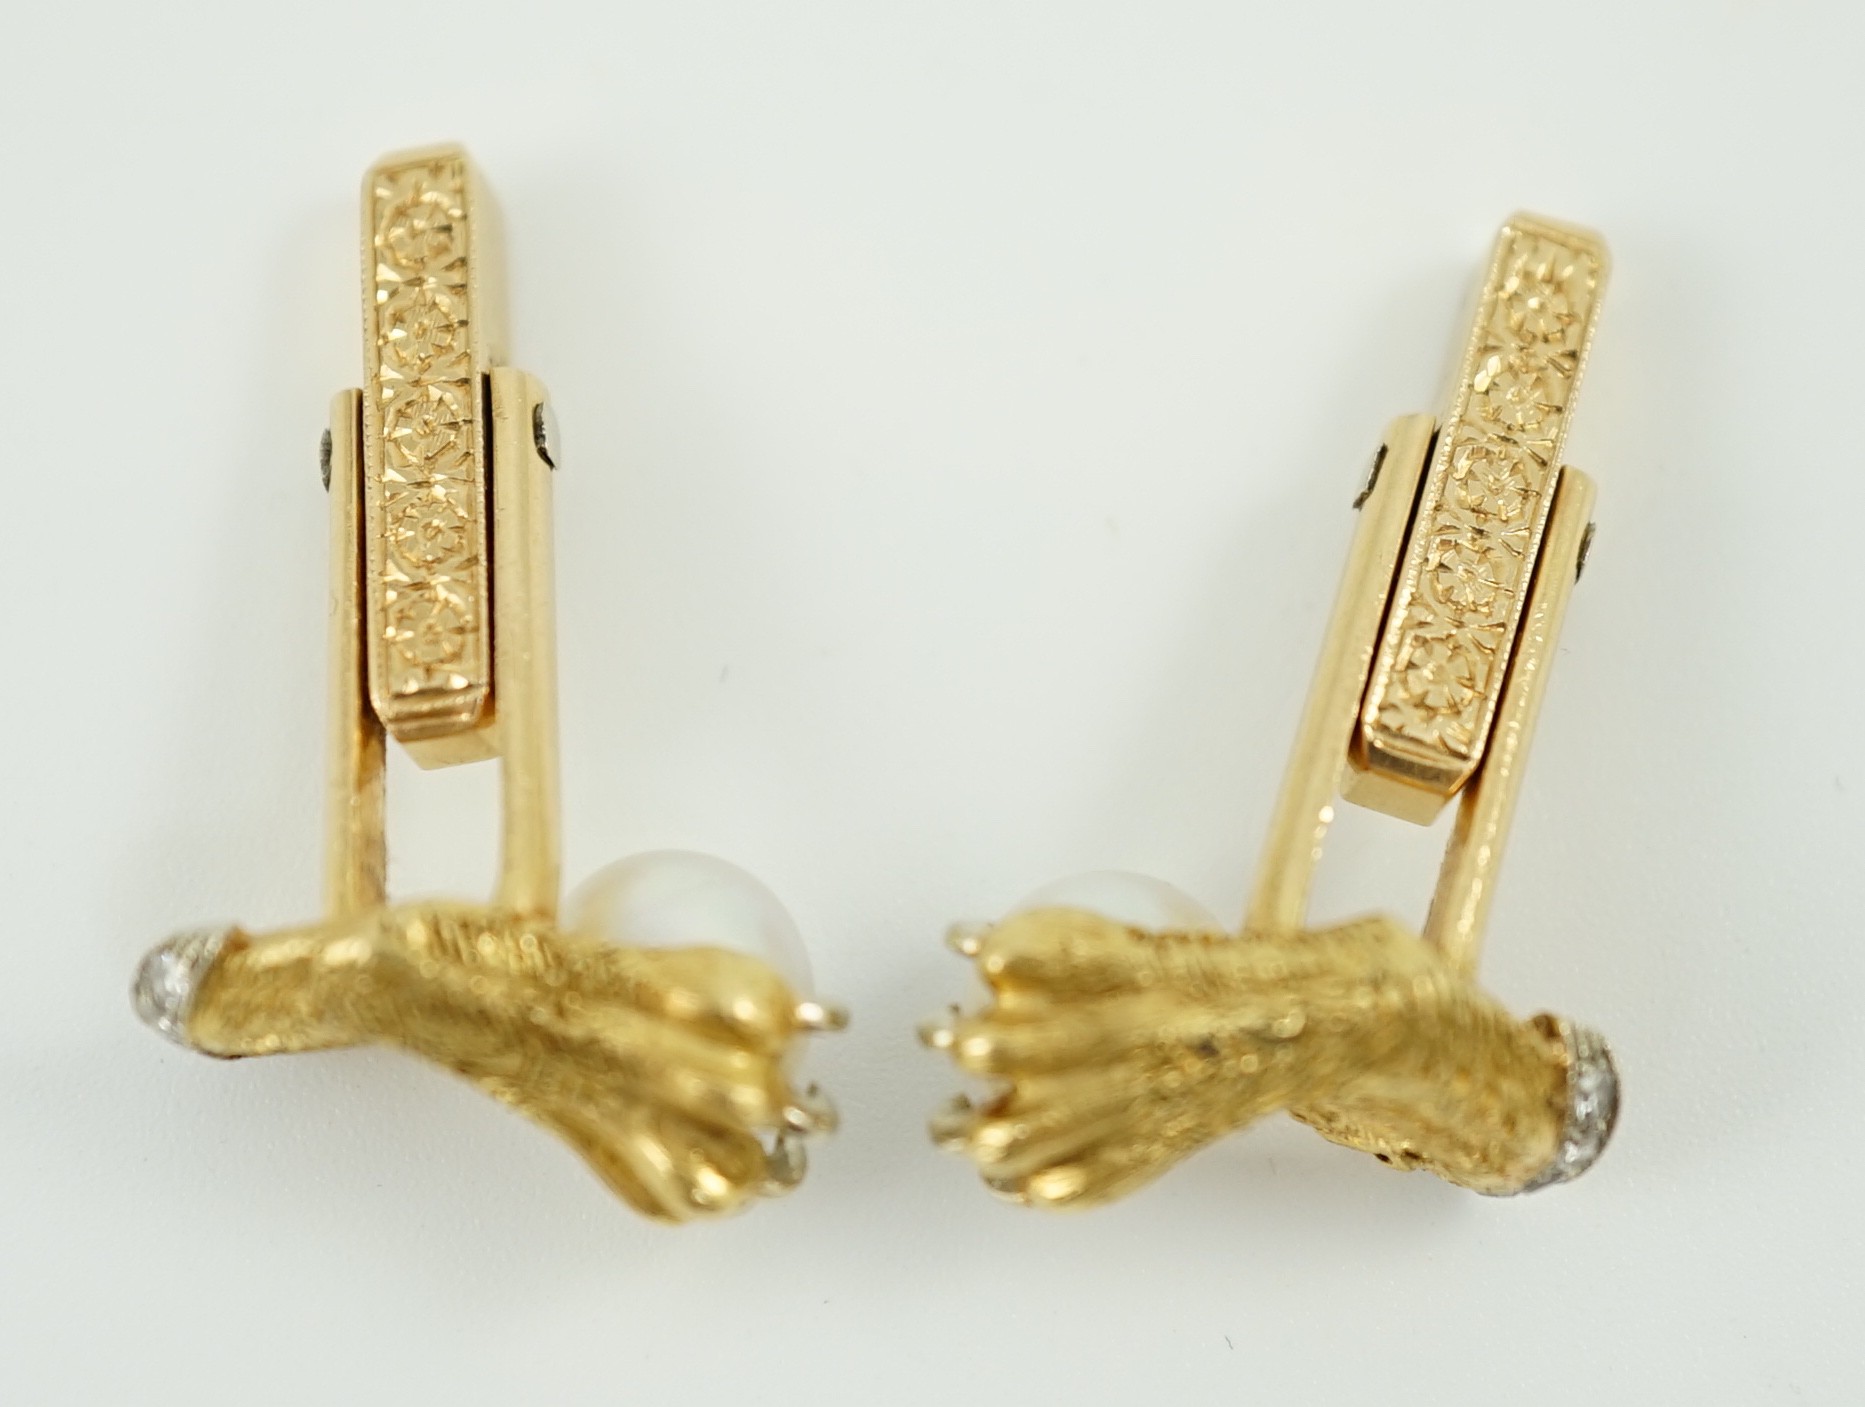 A mid 20th century pair of engraved and textured gold and platinum, diamond chip and cultured pearl cufflinks, each modelled as a lion's paw